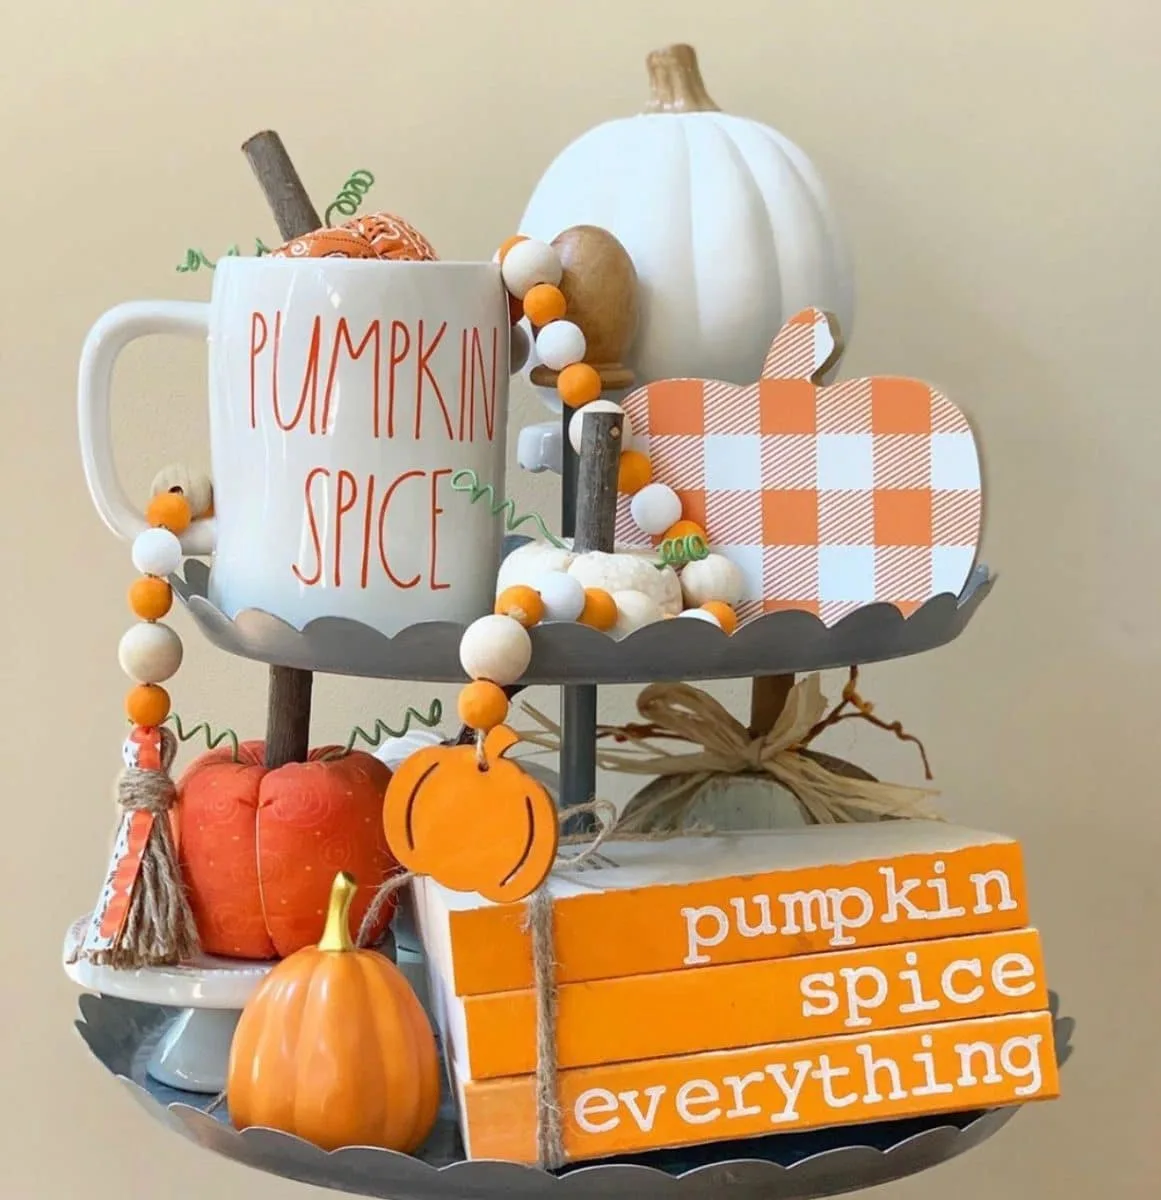 Halloween tiered tray ideas for home.  Orange and white plaid pumpkins, pumpkin spice mug, orange and white wooden beads, pumpkin spice everything wooden books, and two tiered tray